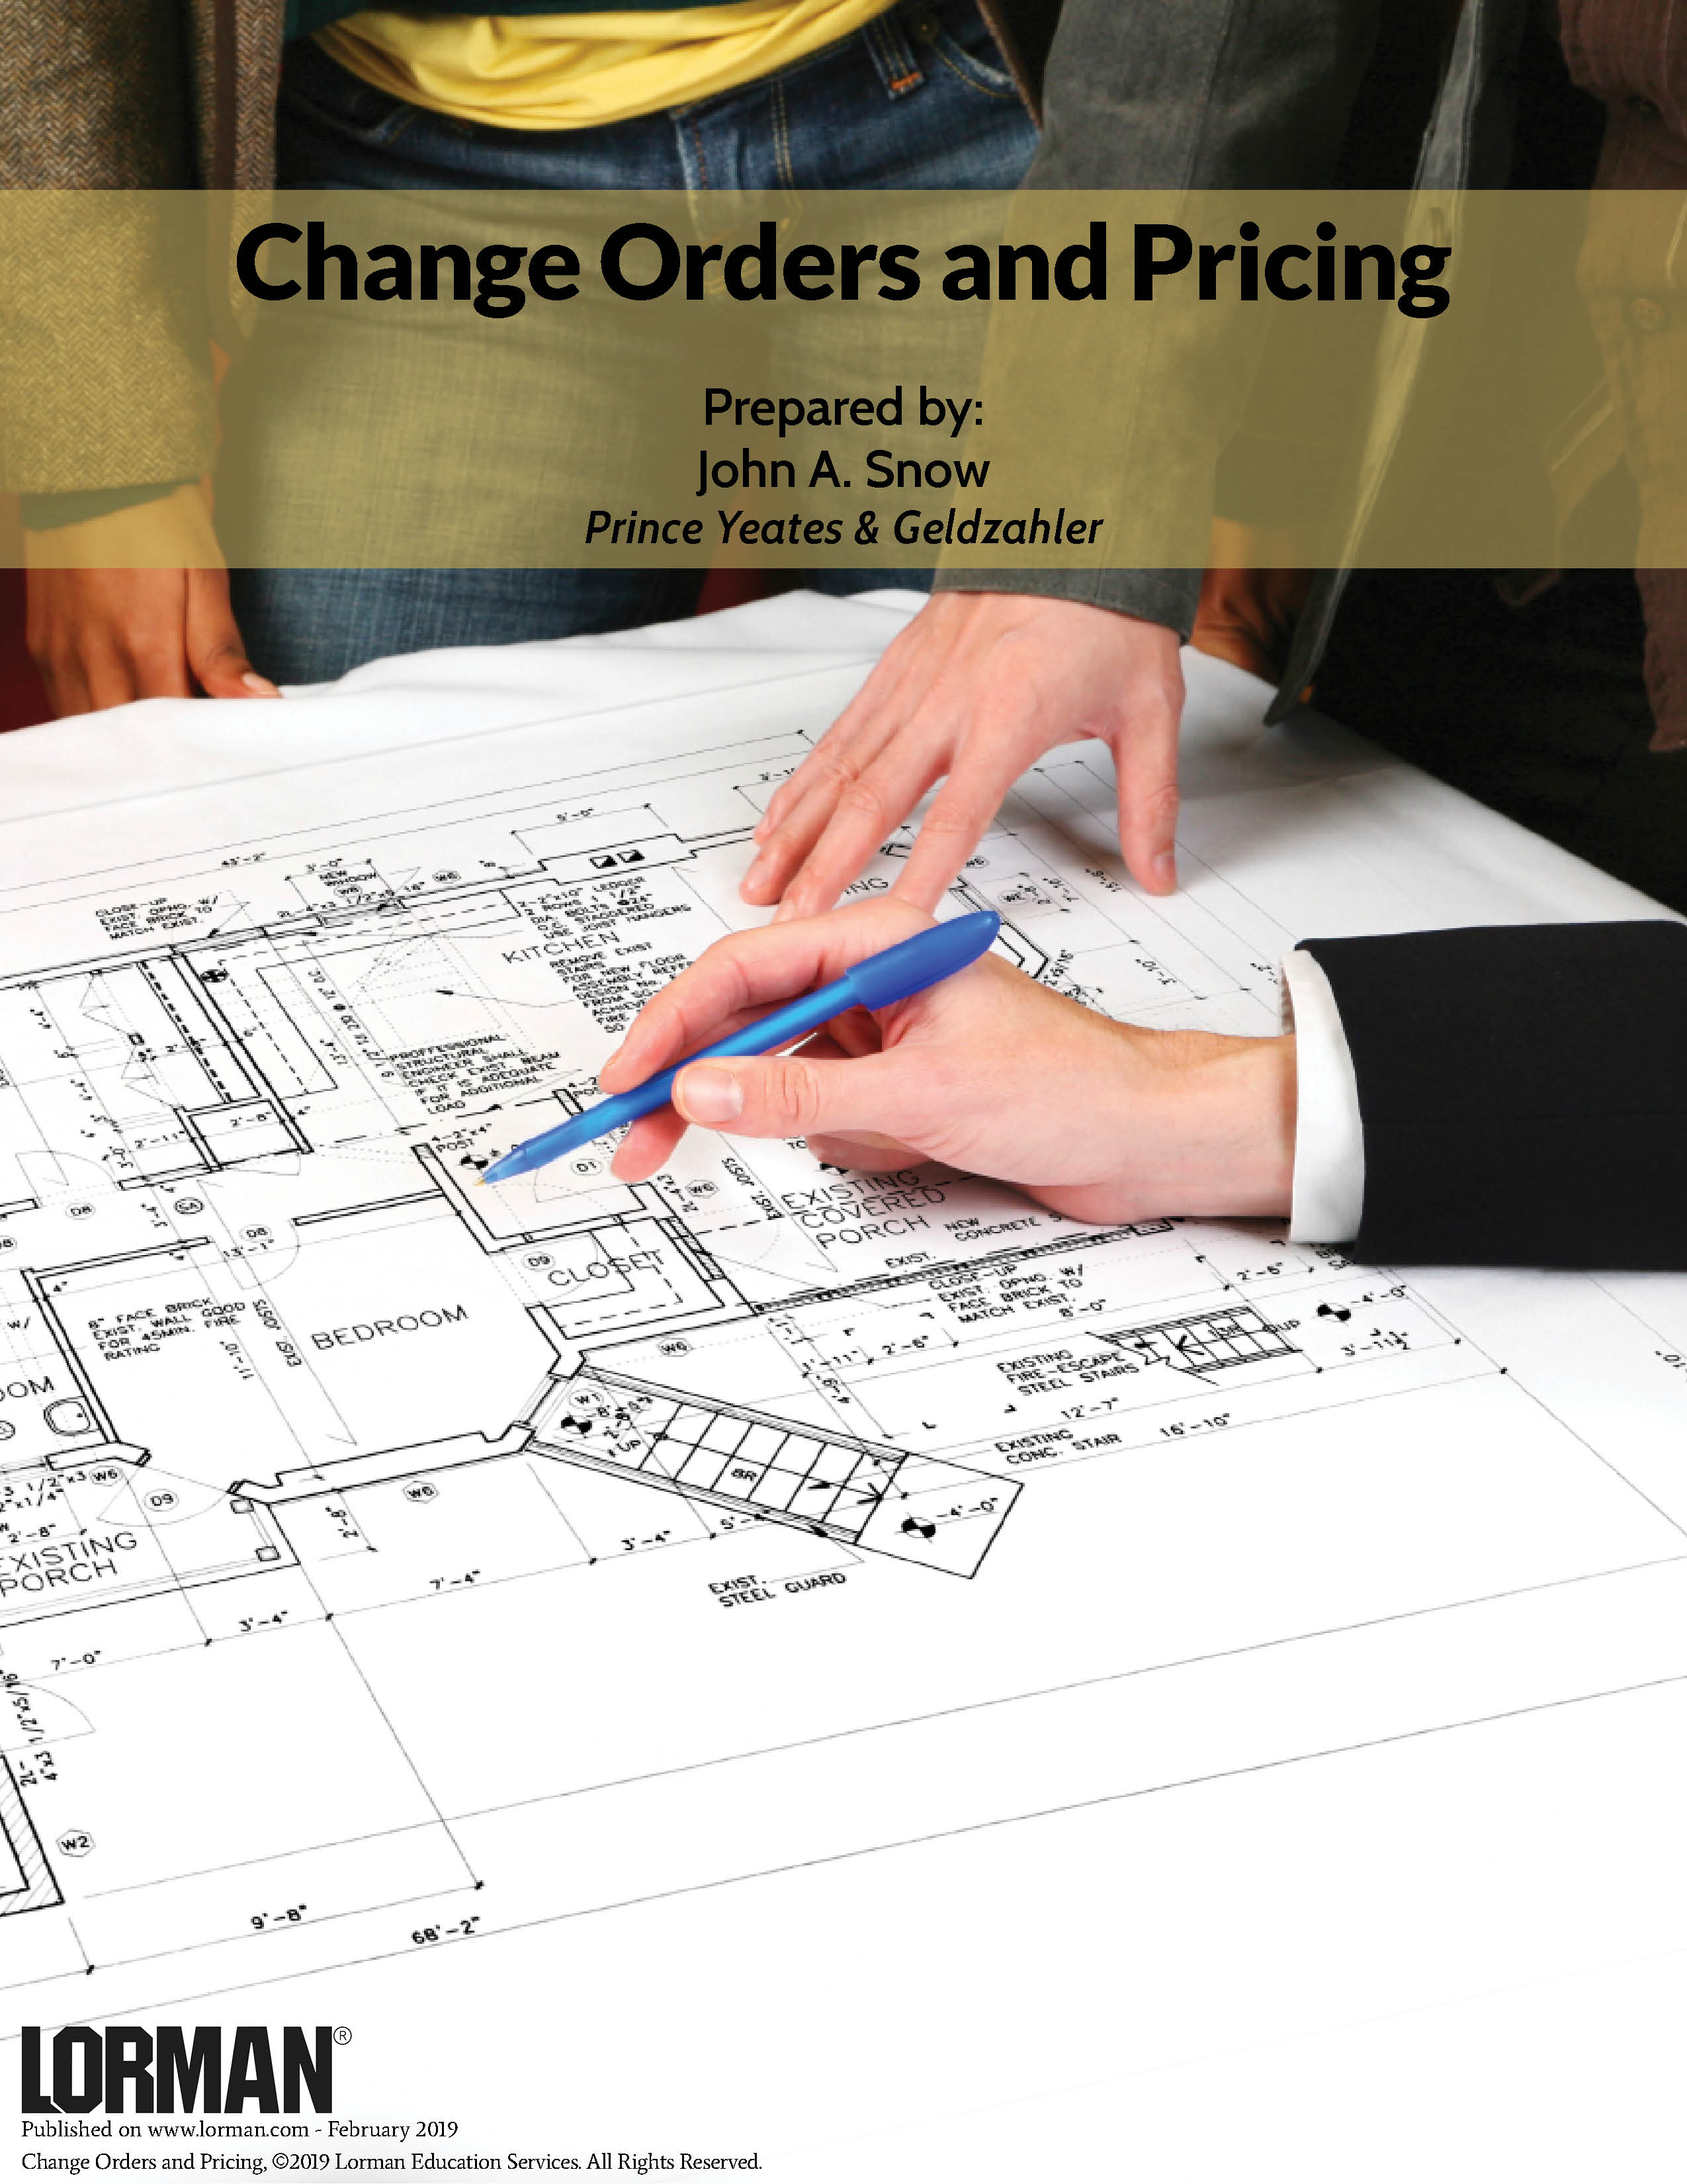 Change Orders and Pricing